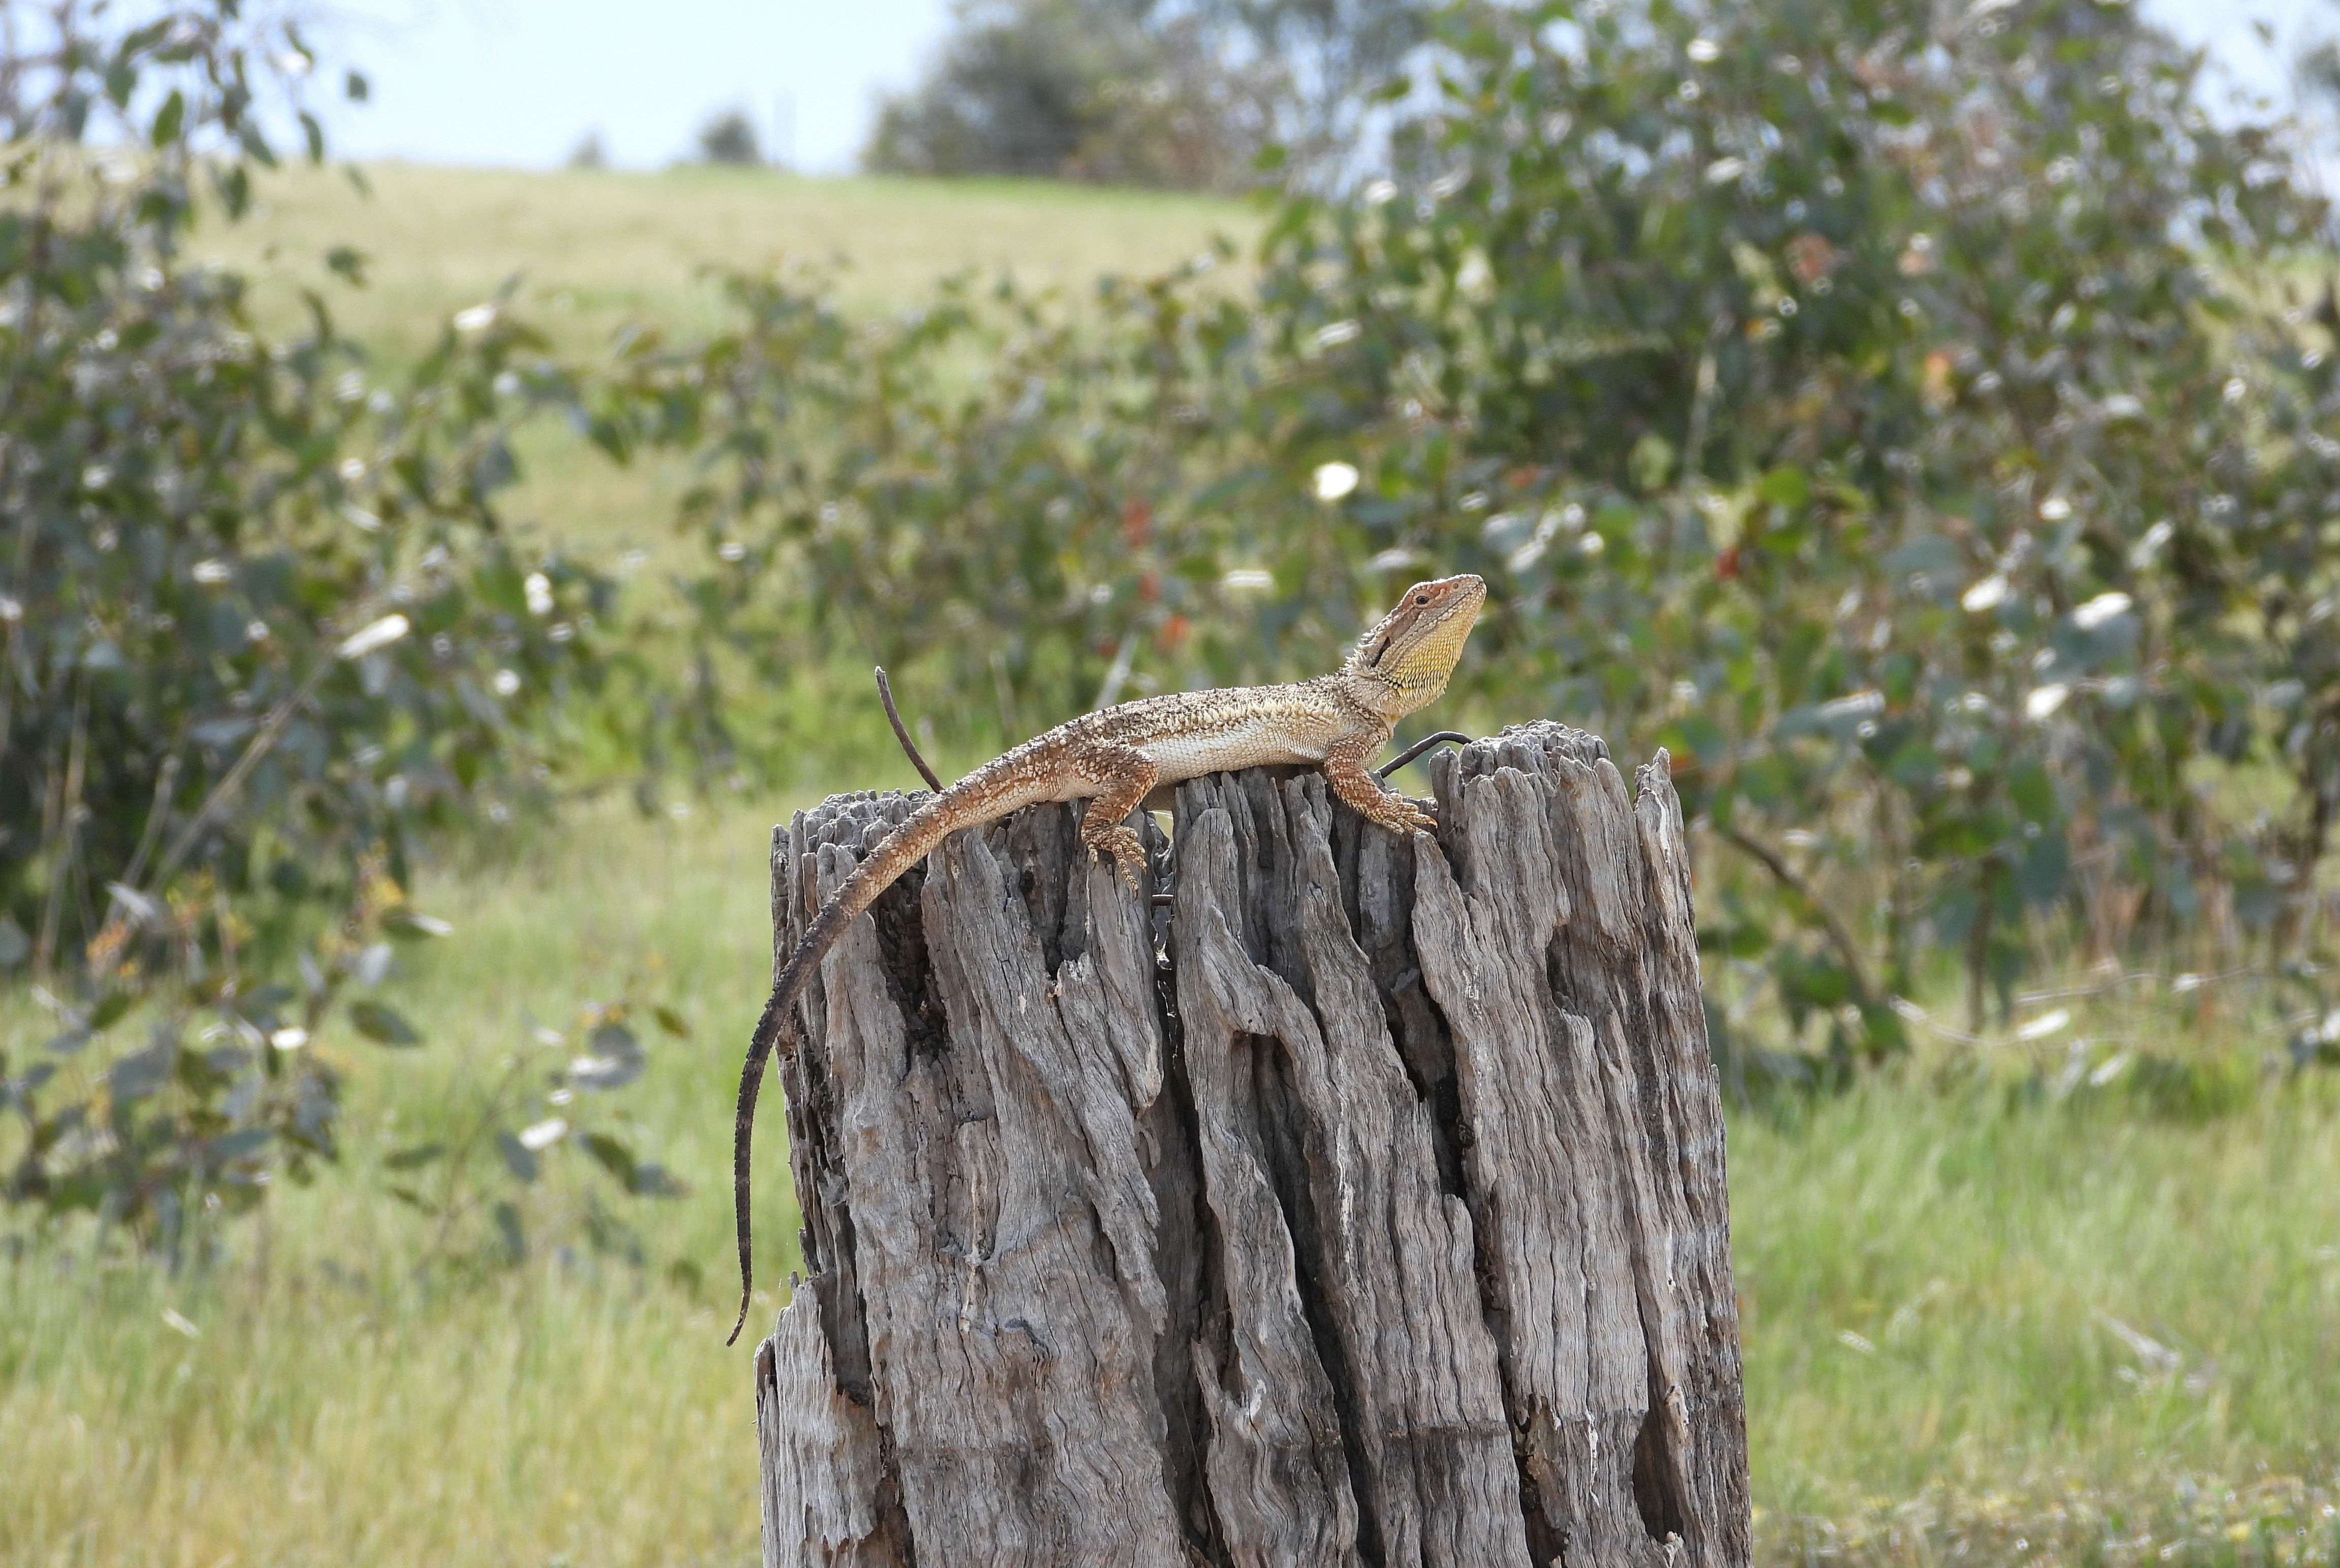 A Bearded Dragon by Suzey Barker and Snow Gums by Nicola Beautyman